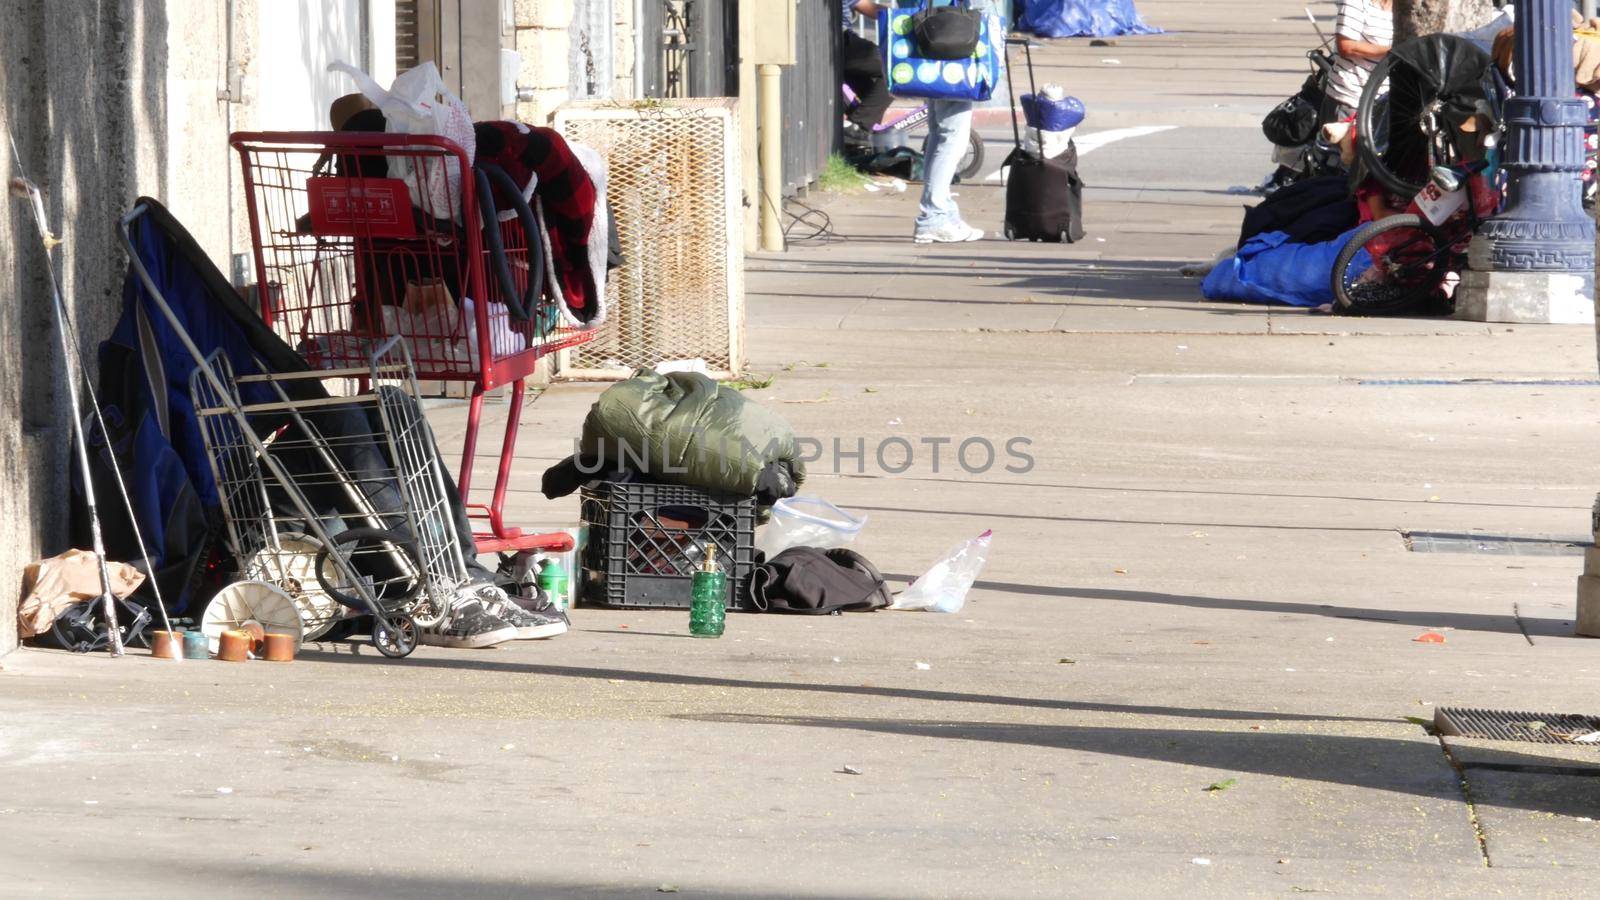 SAN DIEGO, CALIFORNIA USA - 4 JAN 2020: Stuff of homeless street people on walkway, truck on roadside. Begging problem in downtown of city near Los Angeles. Jobless beggars live on pavements by DogoraSun